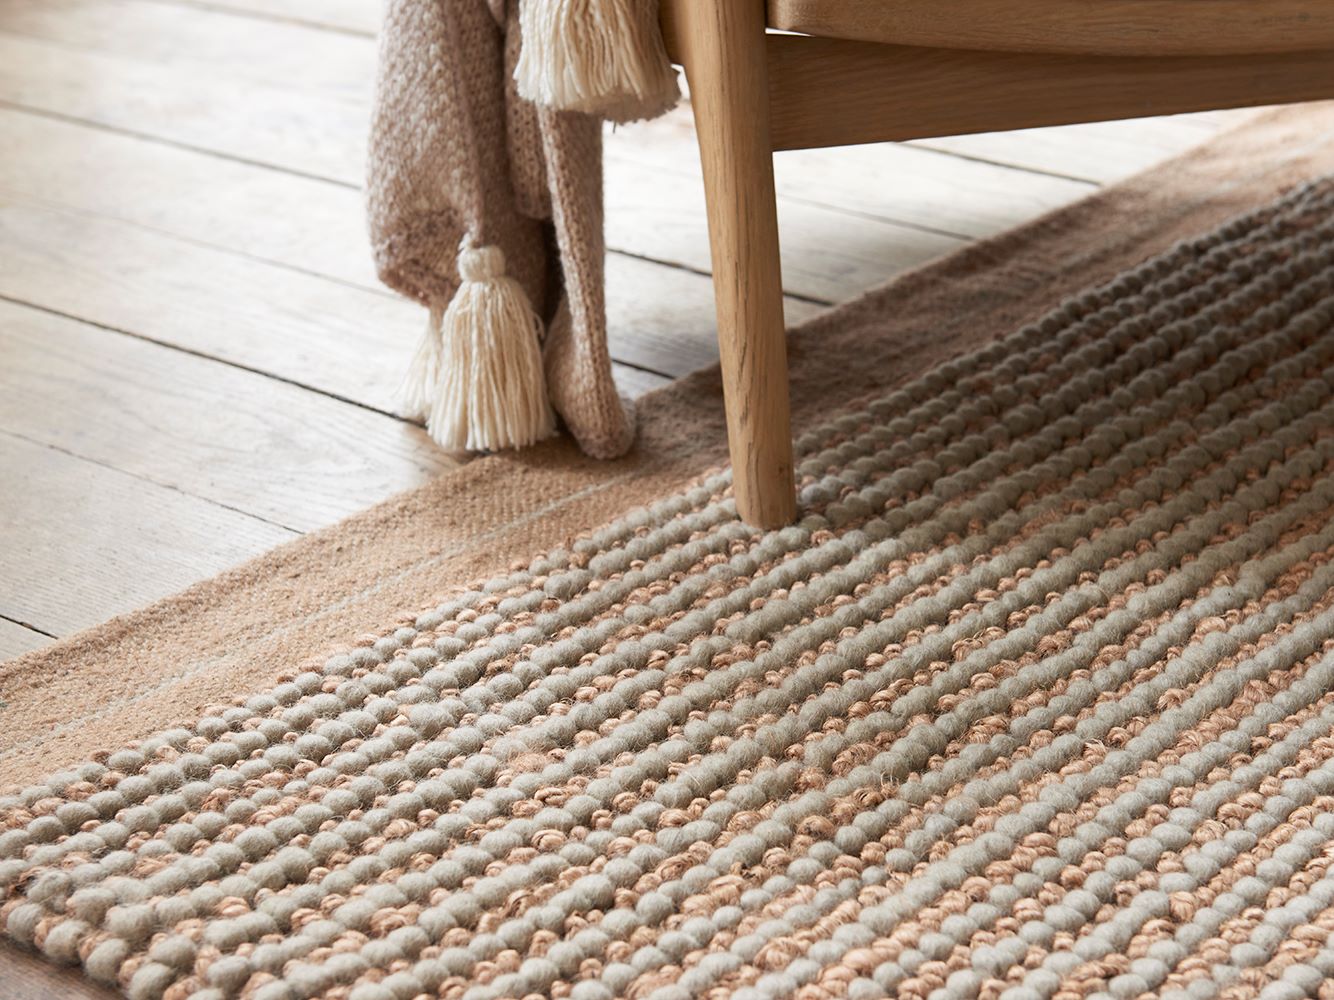 What Is A Jute Rug?